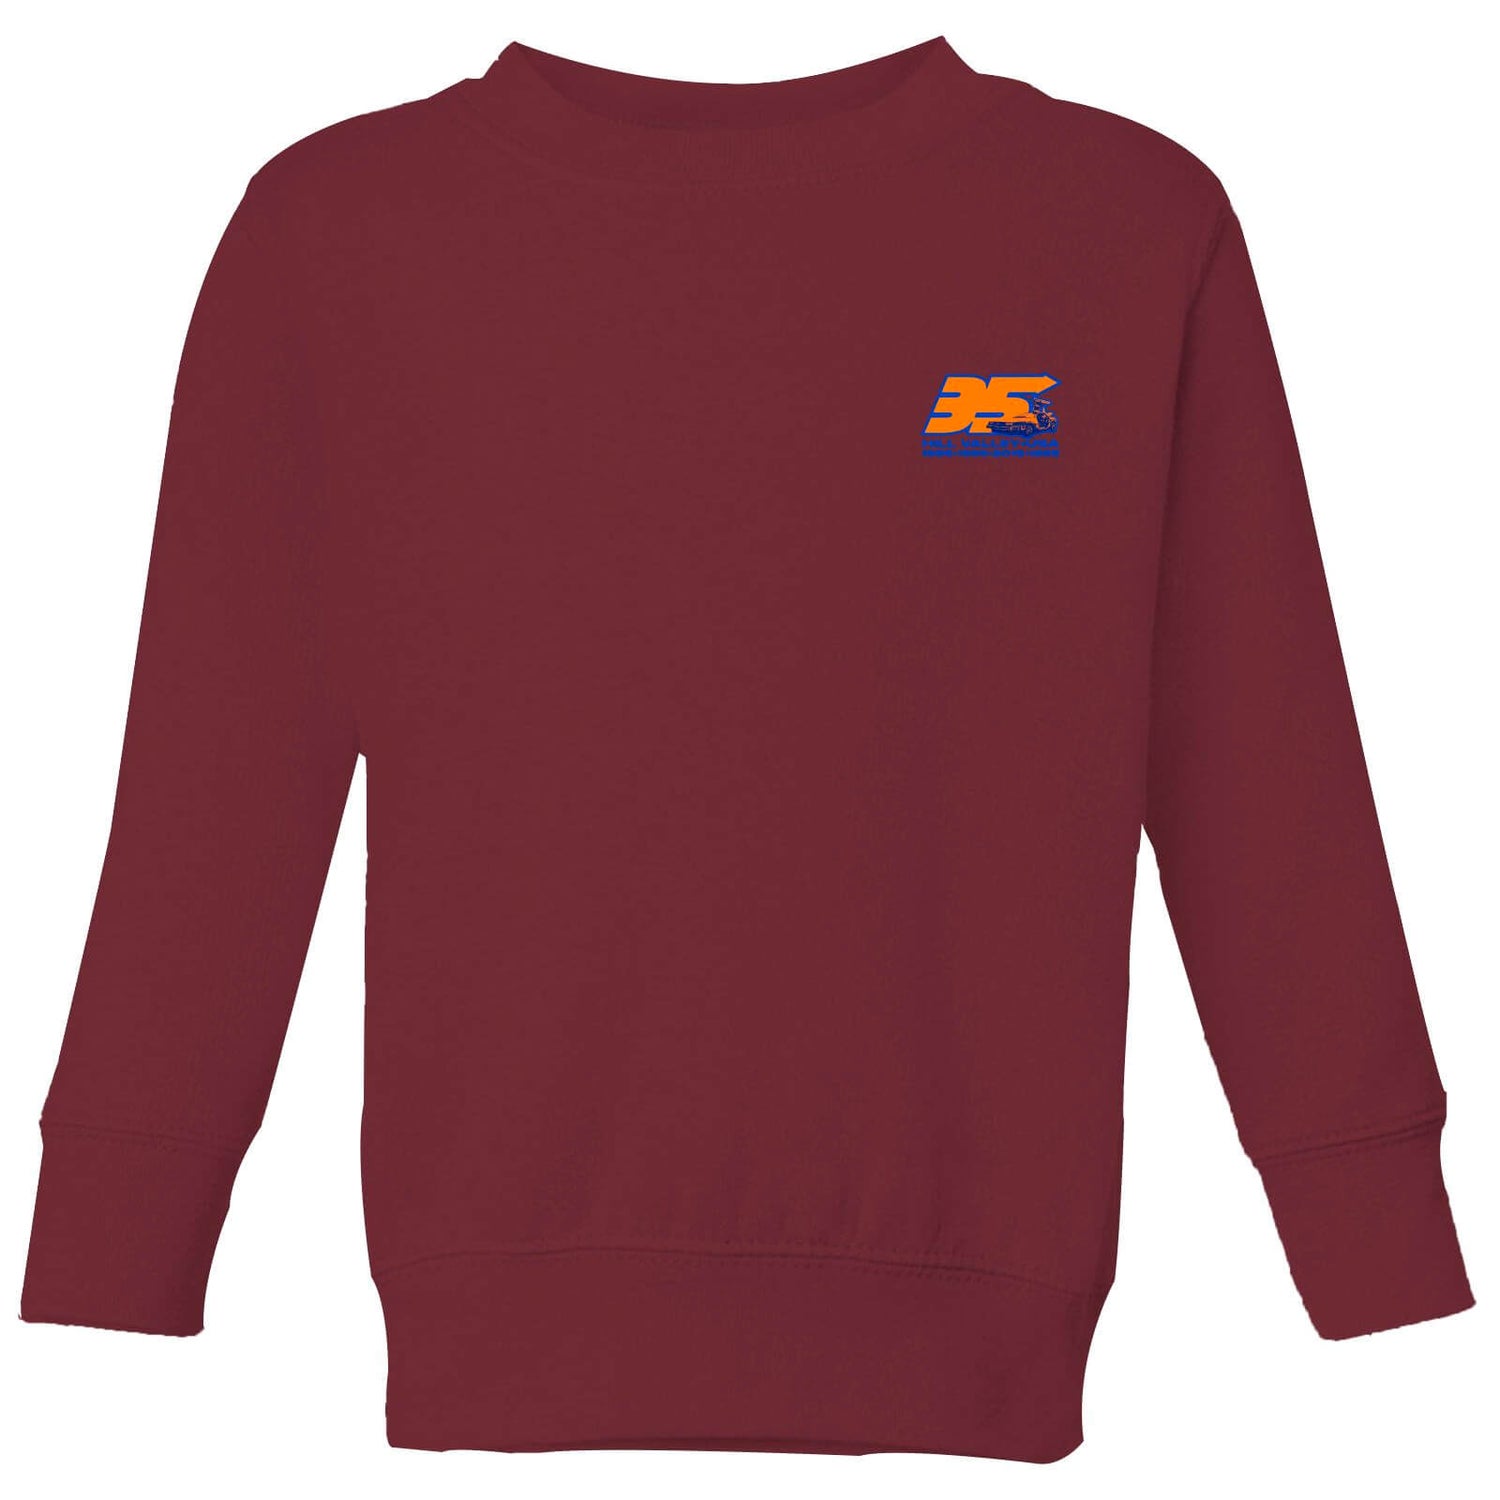 Back To The Future 35 Hill Valley Front Kids' Sweatshirt - Burgundy